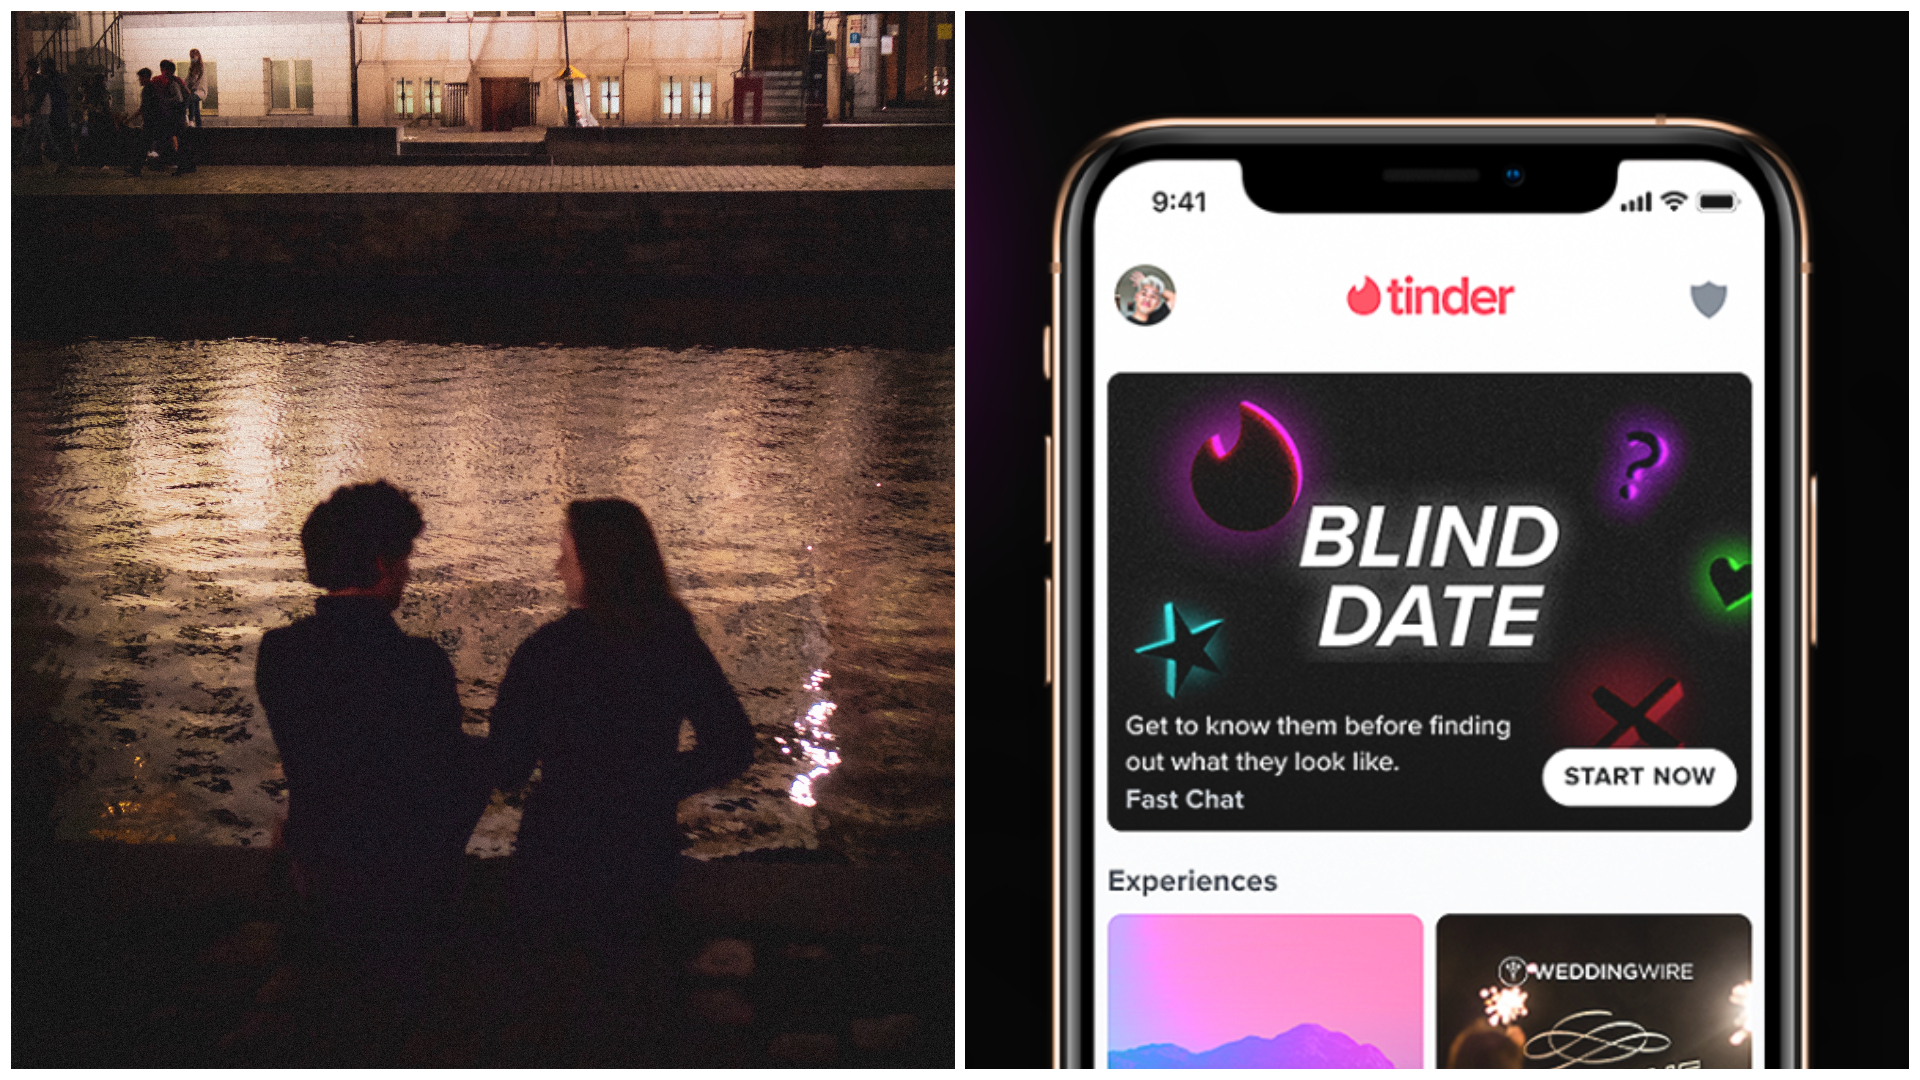 Tinder brings back the 'Blind Date' feature like we're in the 90s